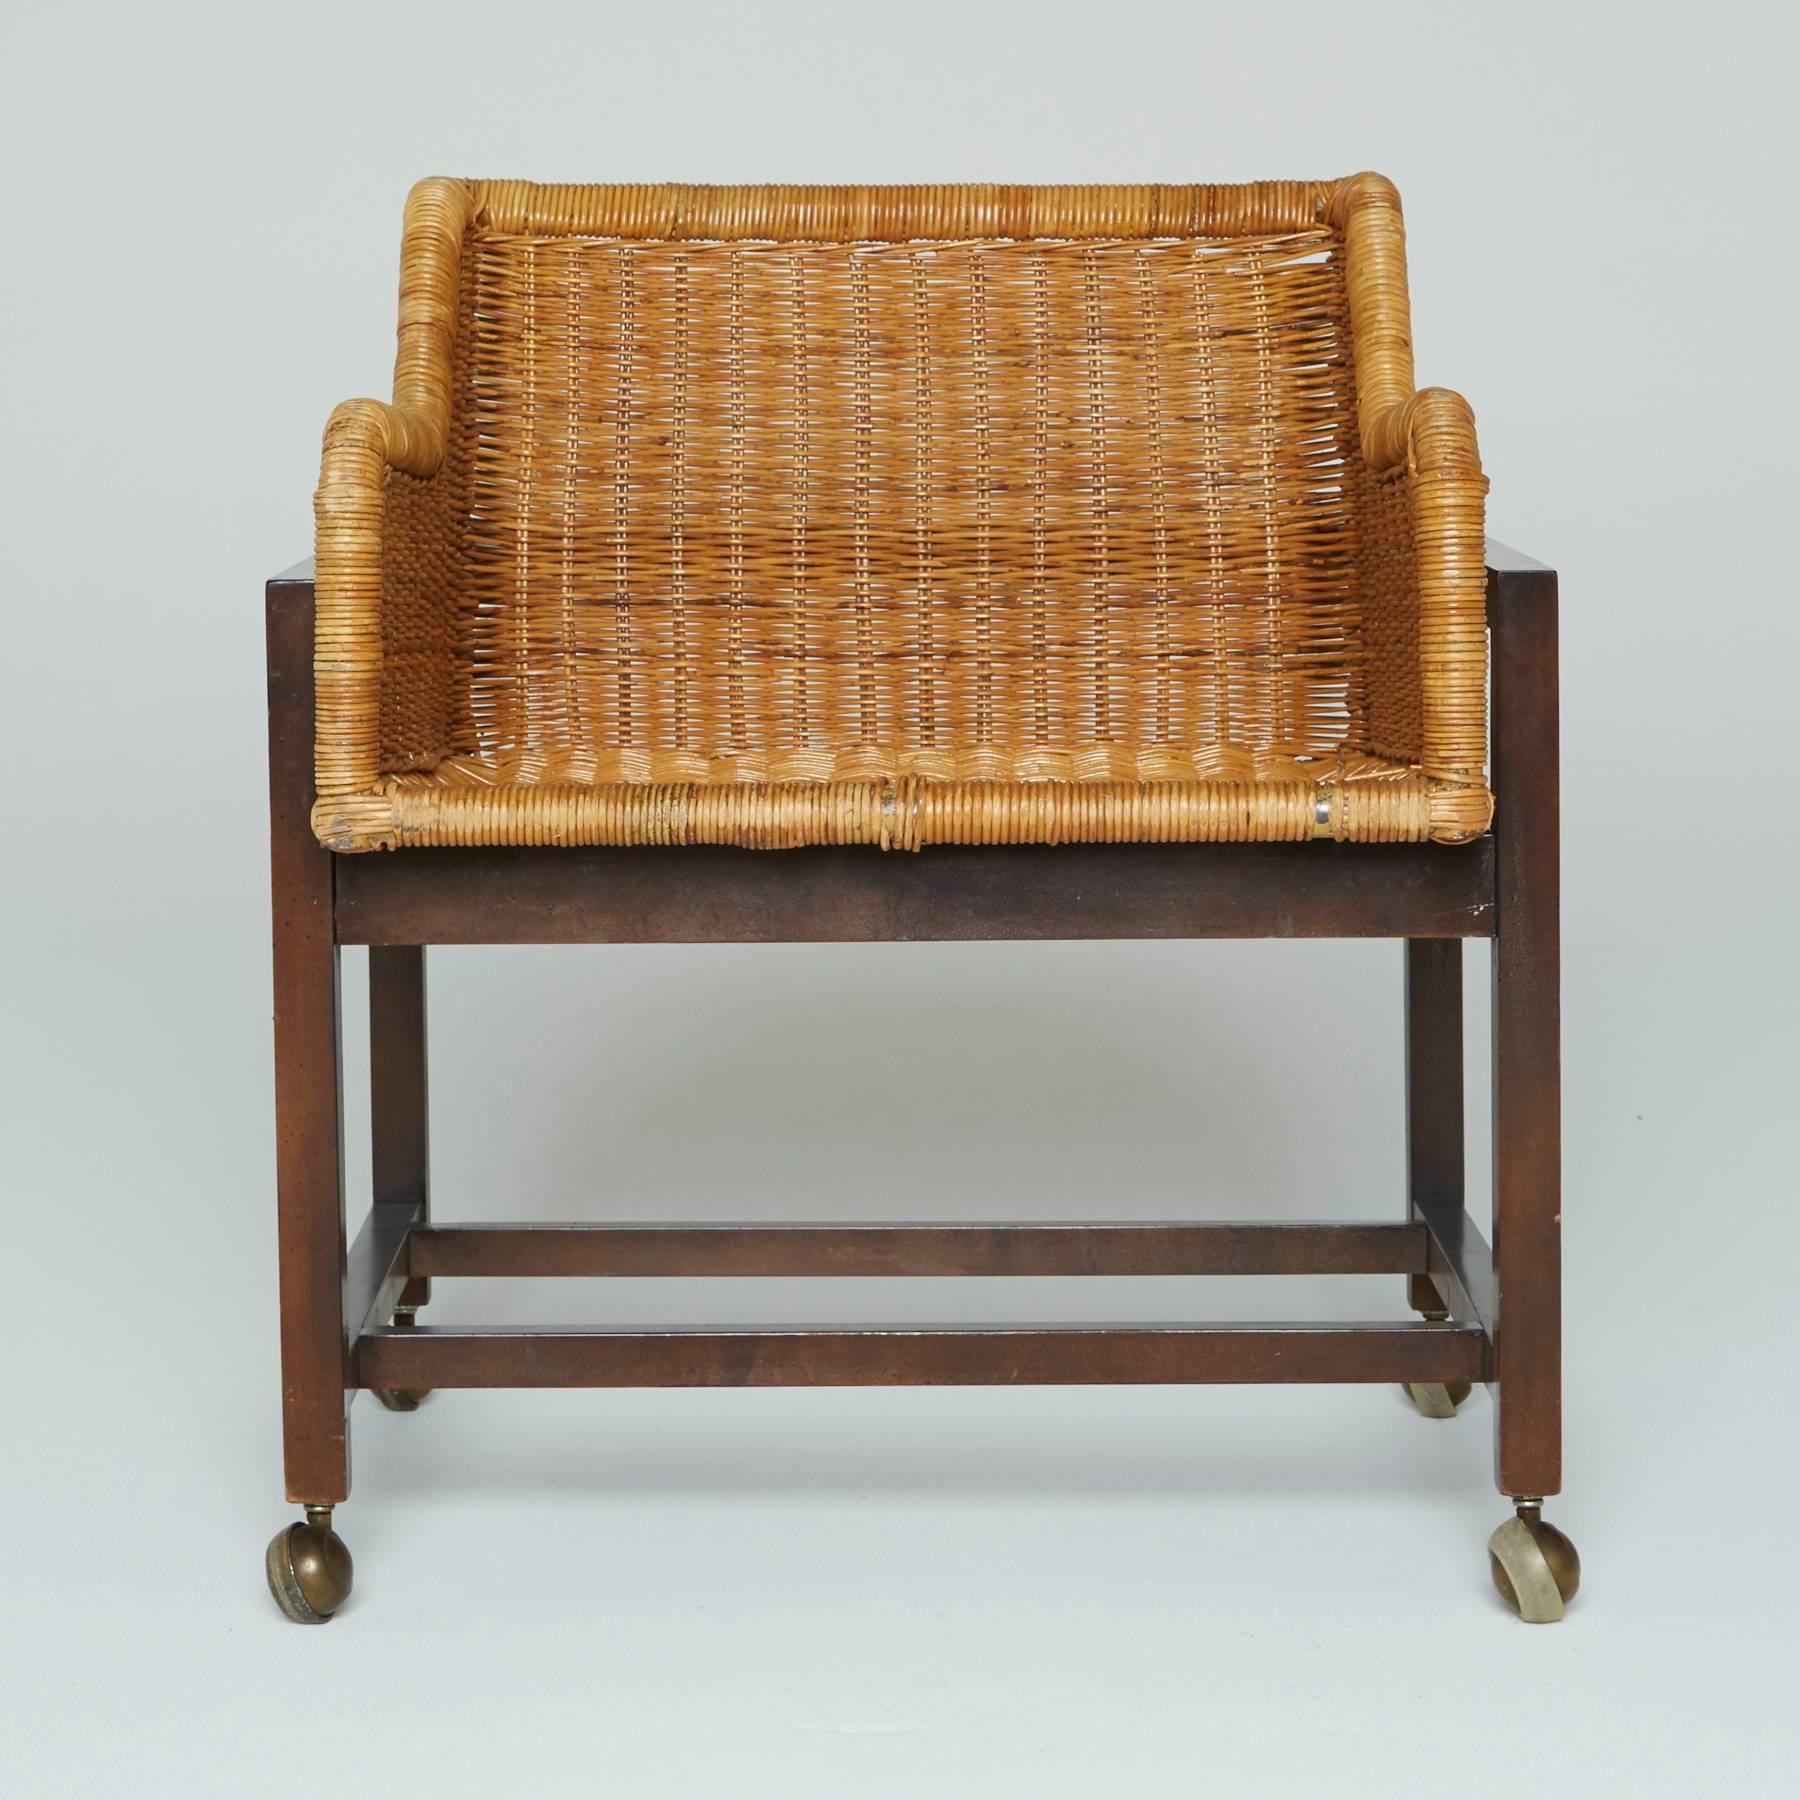 Squared seats made of woven wicker with curvaceous arm rests, displayed by their dark wooden frames and capped with four brass casters. Perfect for both indoor use and outdoor patios, these armchairs fall in line with many relevant styles, from